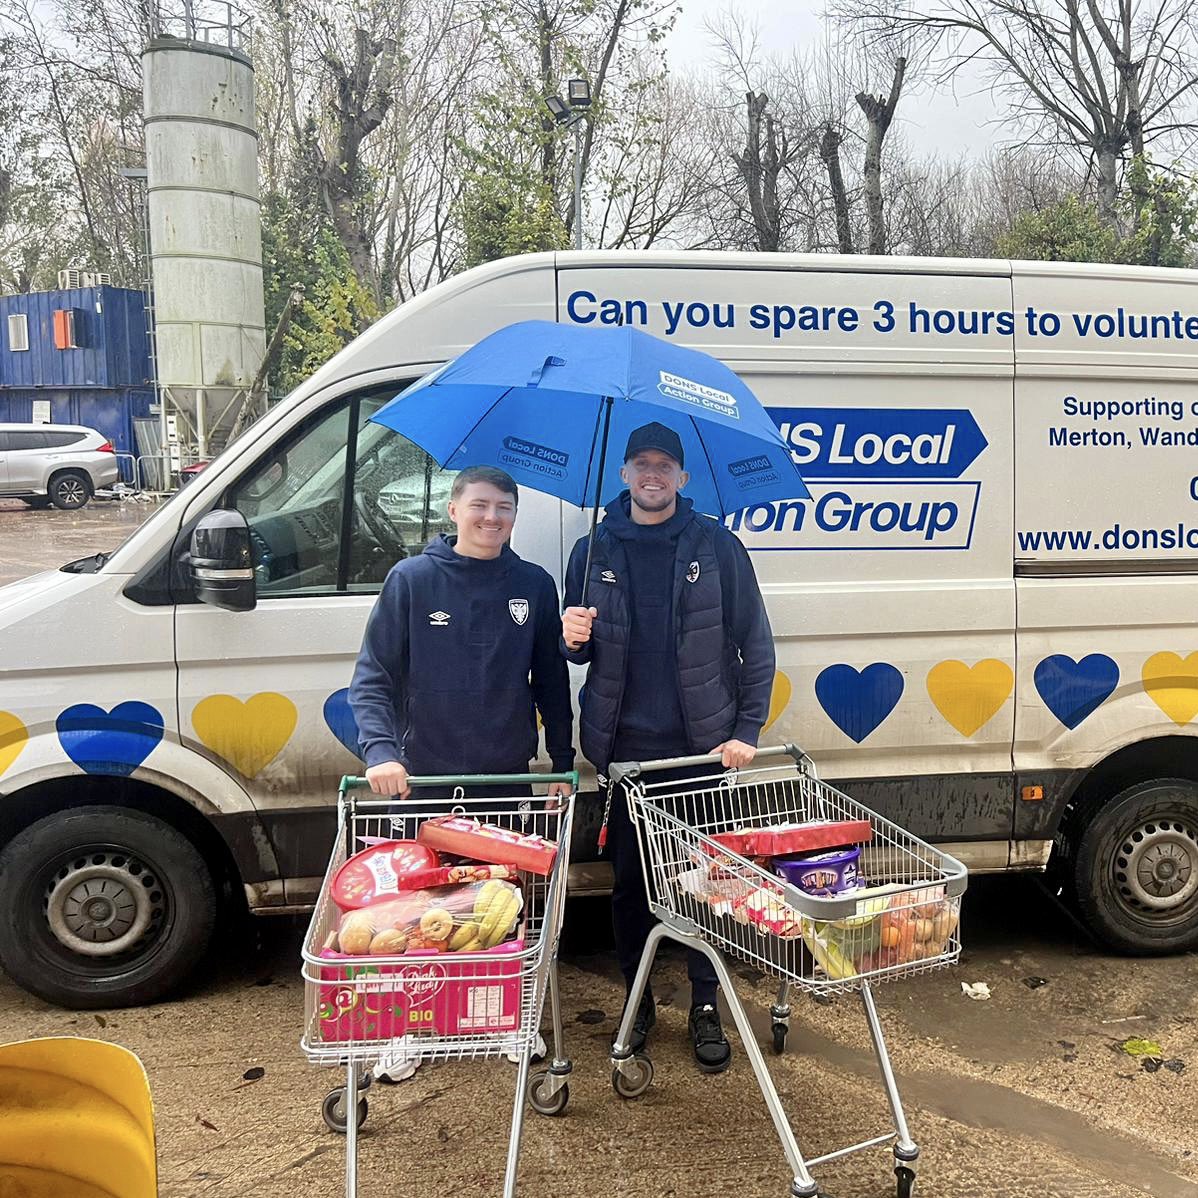 𝗝𝗮𝗺𝗲𝘀 𝘀𝗾𝘂𝗮𝗿𝗲𝗱 🙌 @jtilley_98 and @JamesBall18 combined to help @DonsLocalAction in the rain yesterday 💪 Donate to and volunteer for DLAG here 👉 tinyurl.com/2j5suvmt #AFCW 🟡🔵